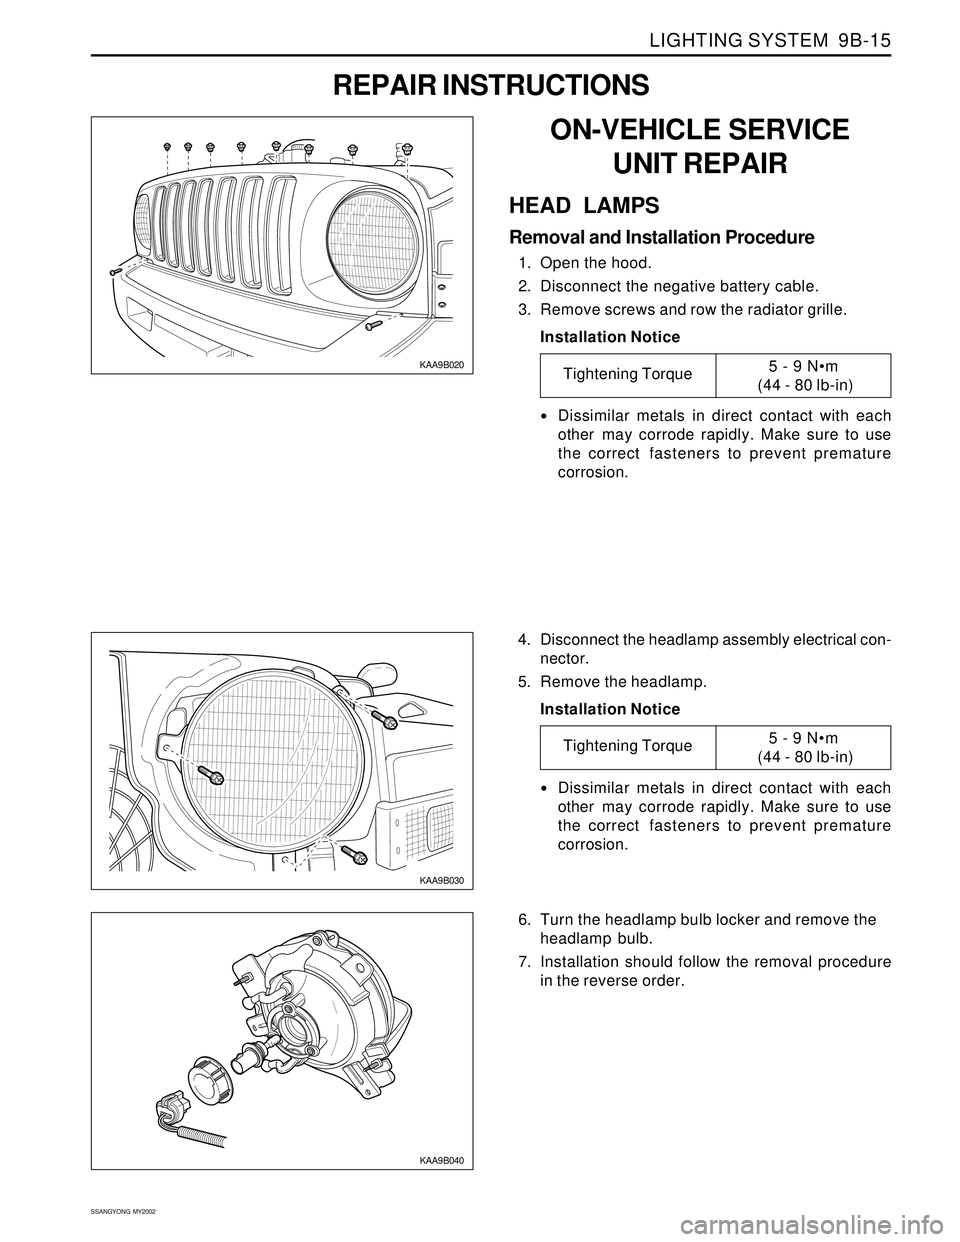 SSANGYONG KORANDO 1997  Service Repair Manual LIGHTING SYSTEM  9B-15
SSANGYONG  MY2002
REPAIR INSTRUCTIONS
KAA9B020
KAA9B030
ON-VEHICLE SERVICE
UNIT REPAIR
HEAD LAMPS
Removal and Installation Procedure
1. Open the hood.
2. Disconnect the negative